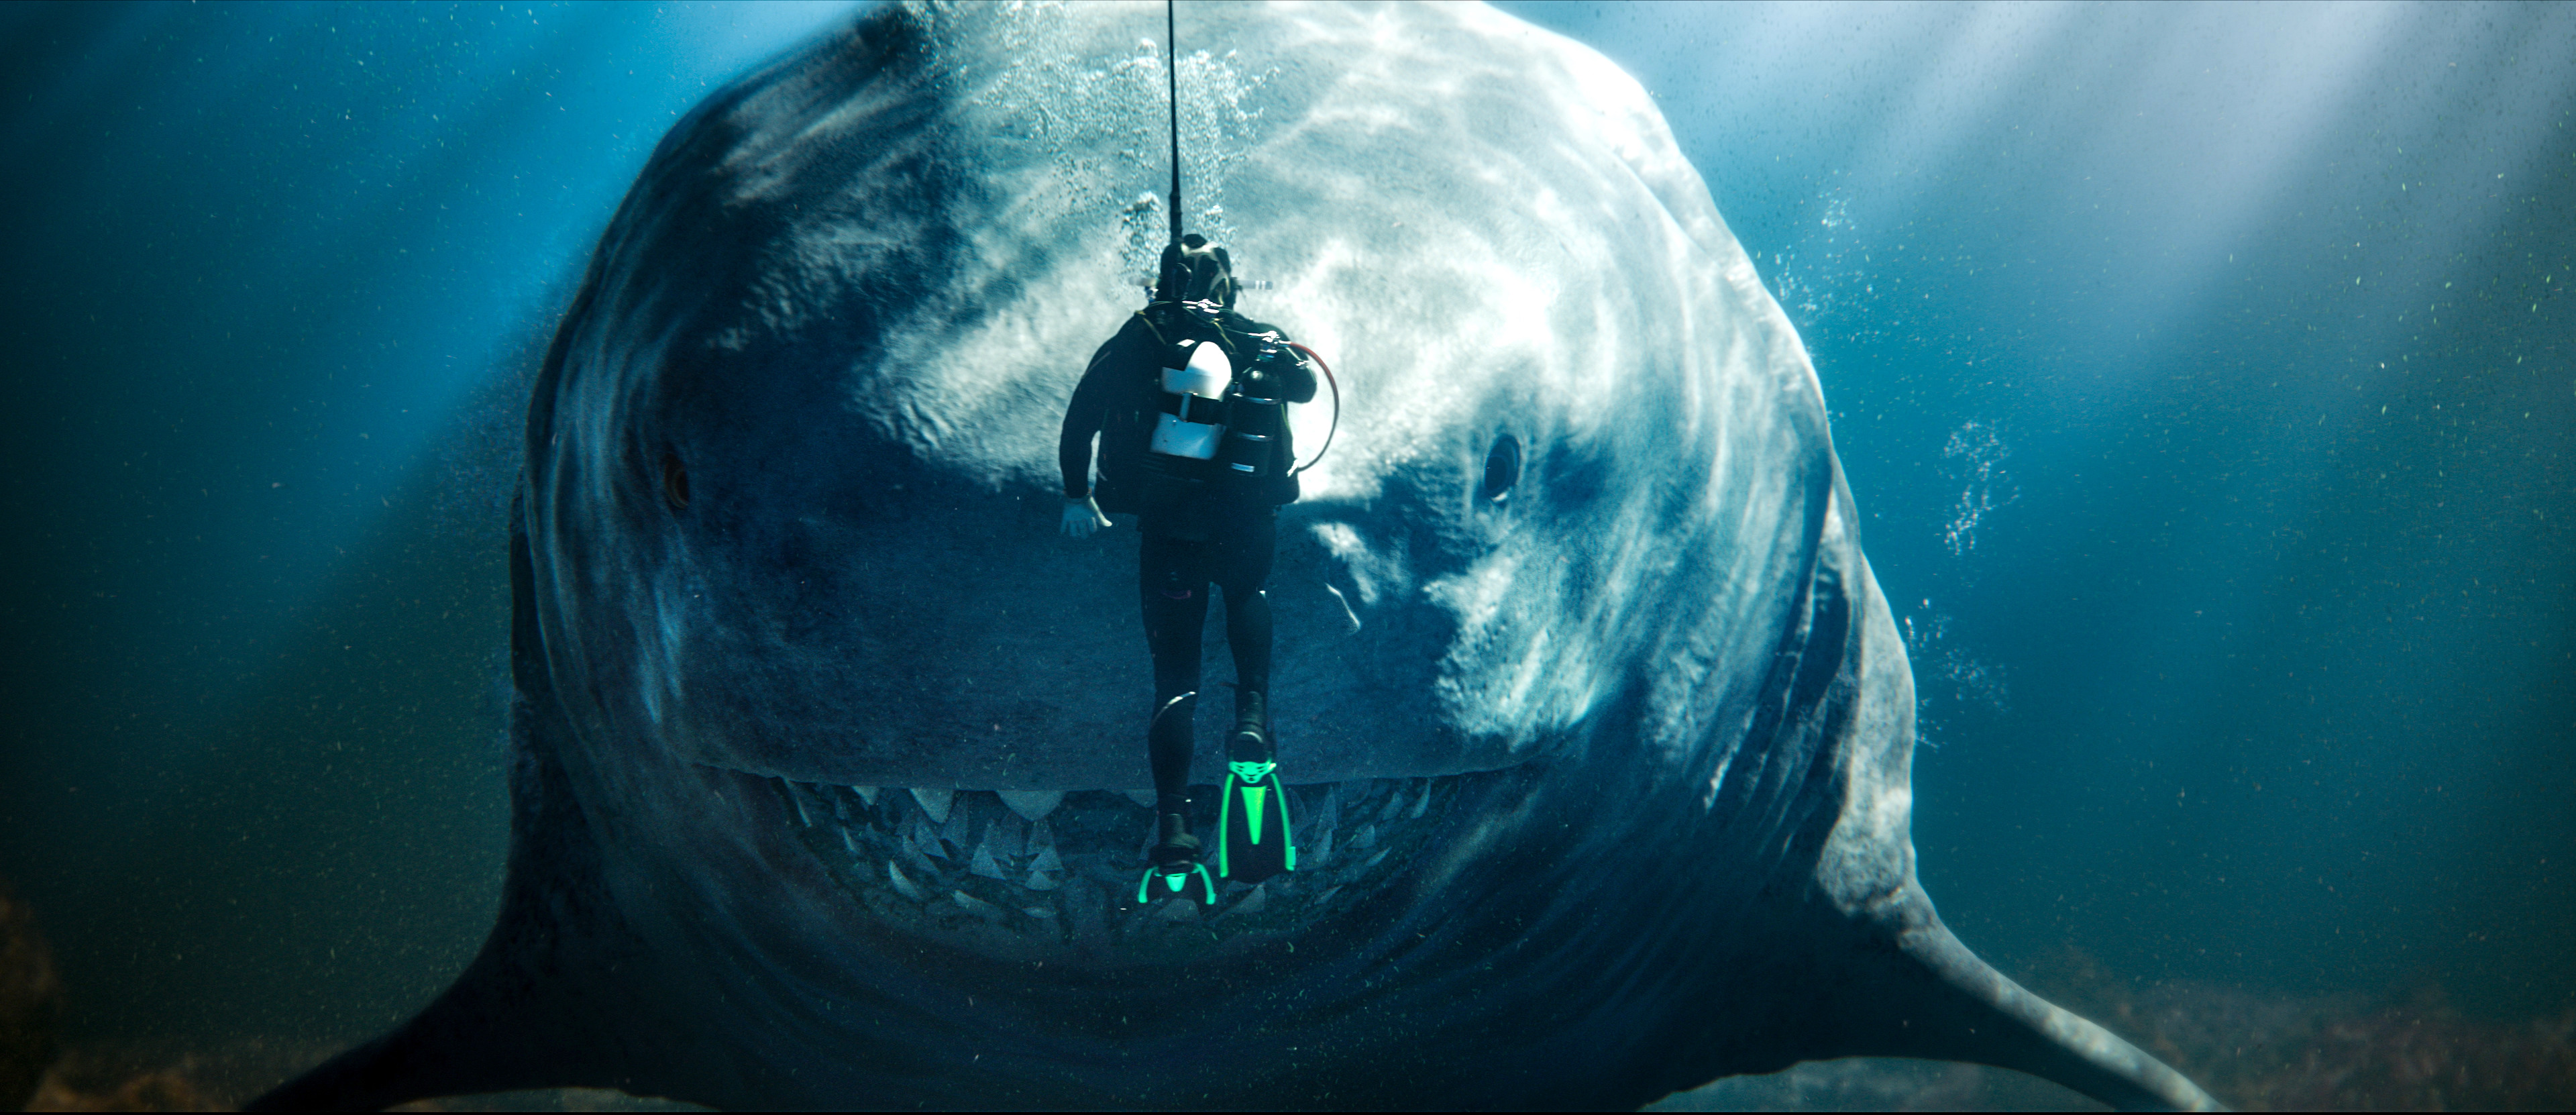 A diver goes face to face with a gigantic megalodon shark in Meg 2: The Trench.